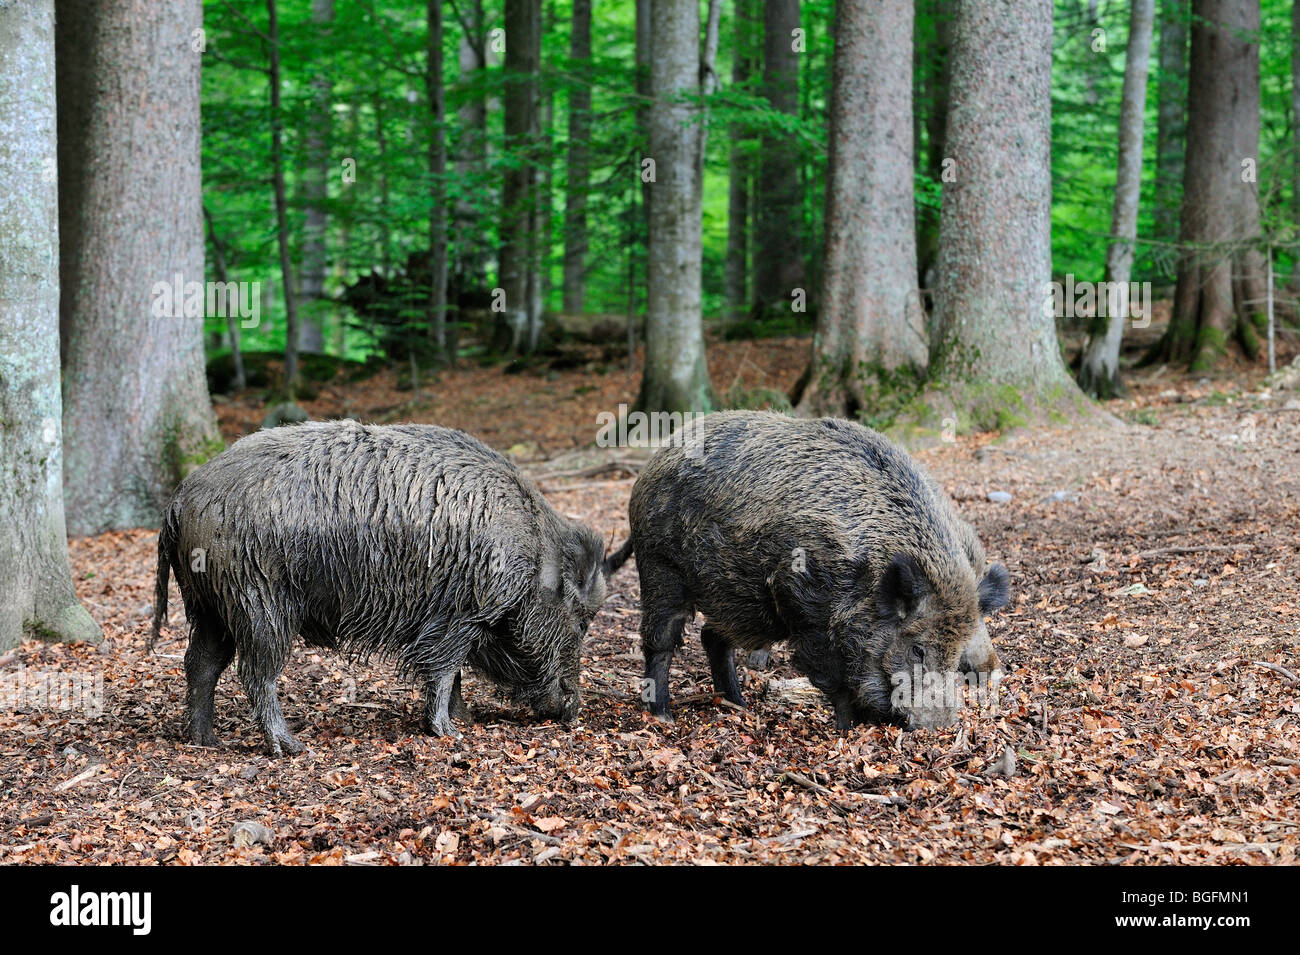 Wild boars (Sus scrofa) sniffing for food among leaves in forest Stock Photo